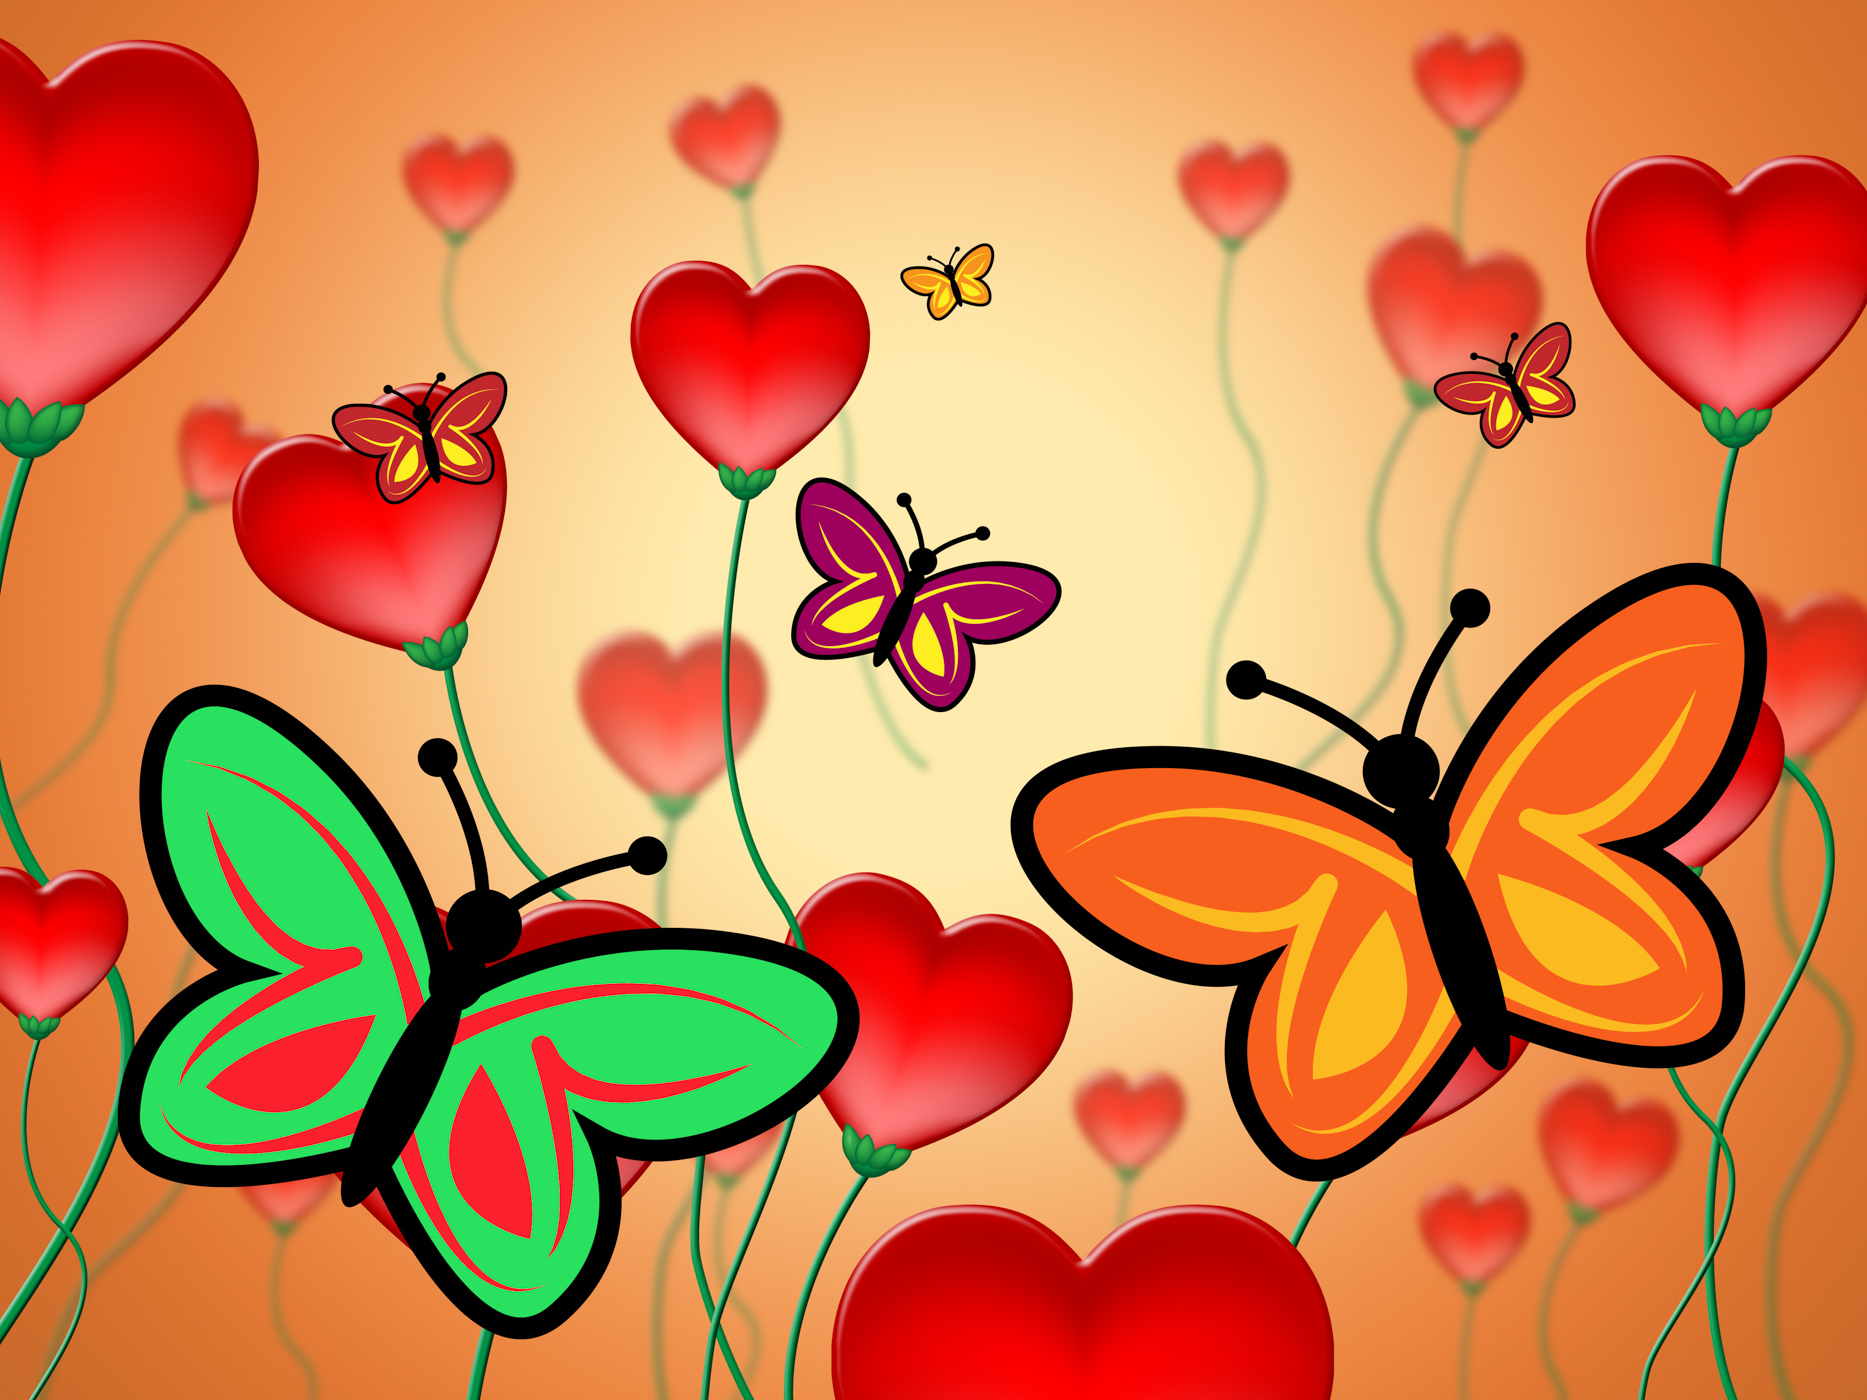 Heart butterflies represents valentine day and butterfly photo